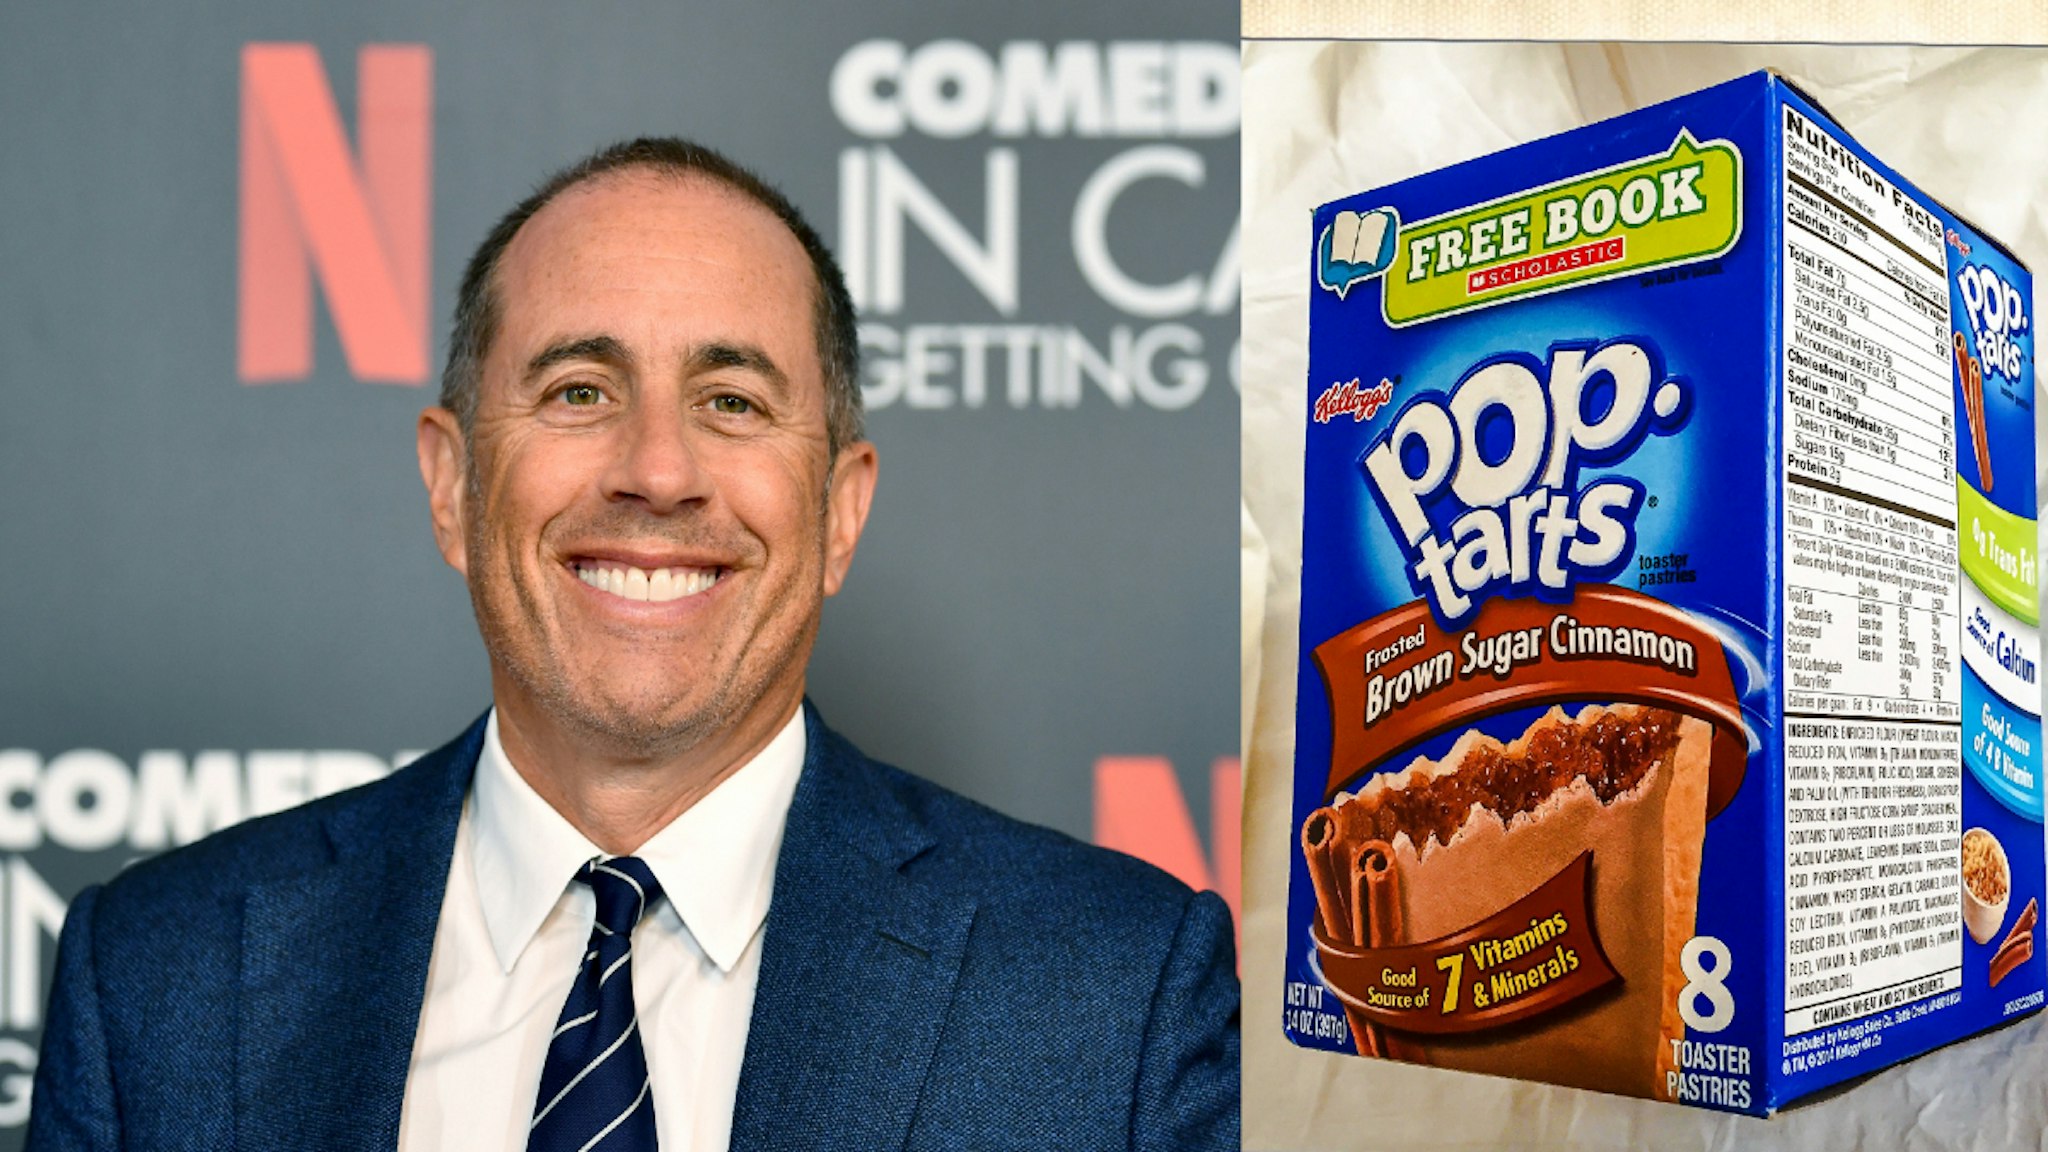 Santa Monica, April 9, 2015. A box of Kellogg brown sugar pop tarts. BEVERLY HILLS, CALIFORNIA - JULY 17: Jerry Seinfeld attends the LA Tastemaker event for Comedians in Cars at The Paley Center for Media on July 17, 2019 in Beverly Hills City.